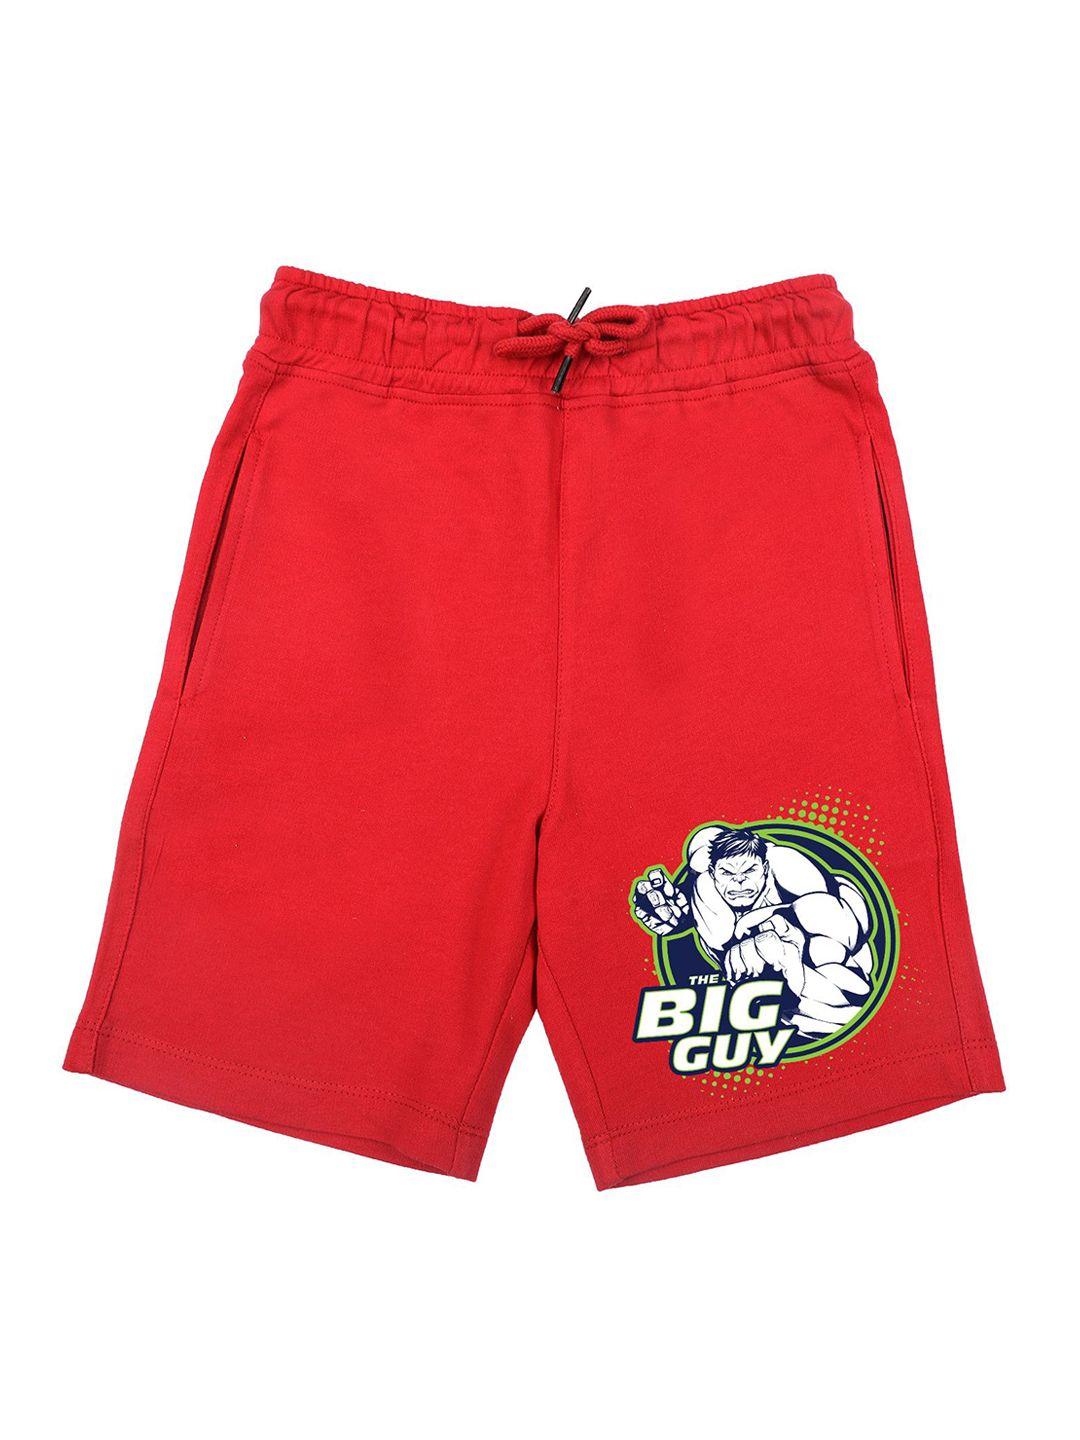 marvel by wear your mind boys red superhero printed hulk shorts